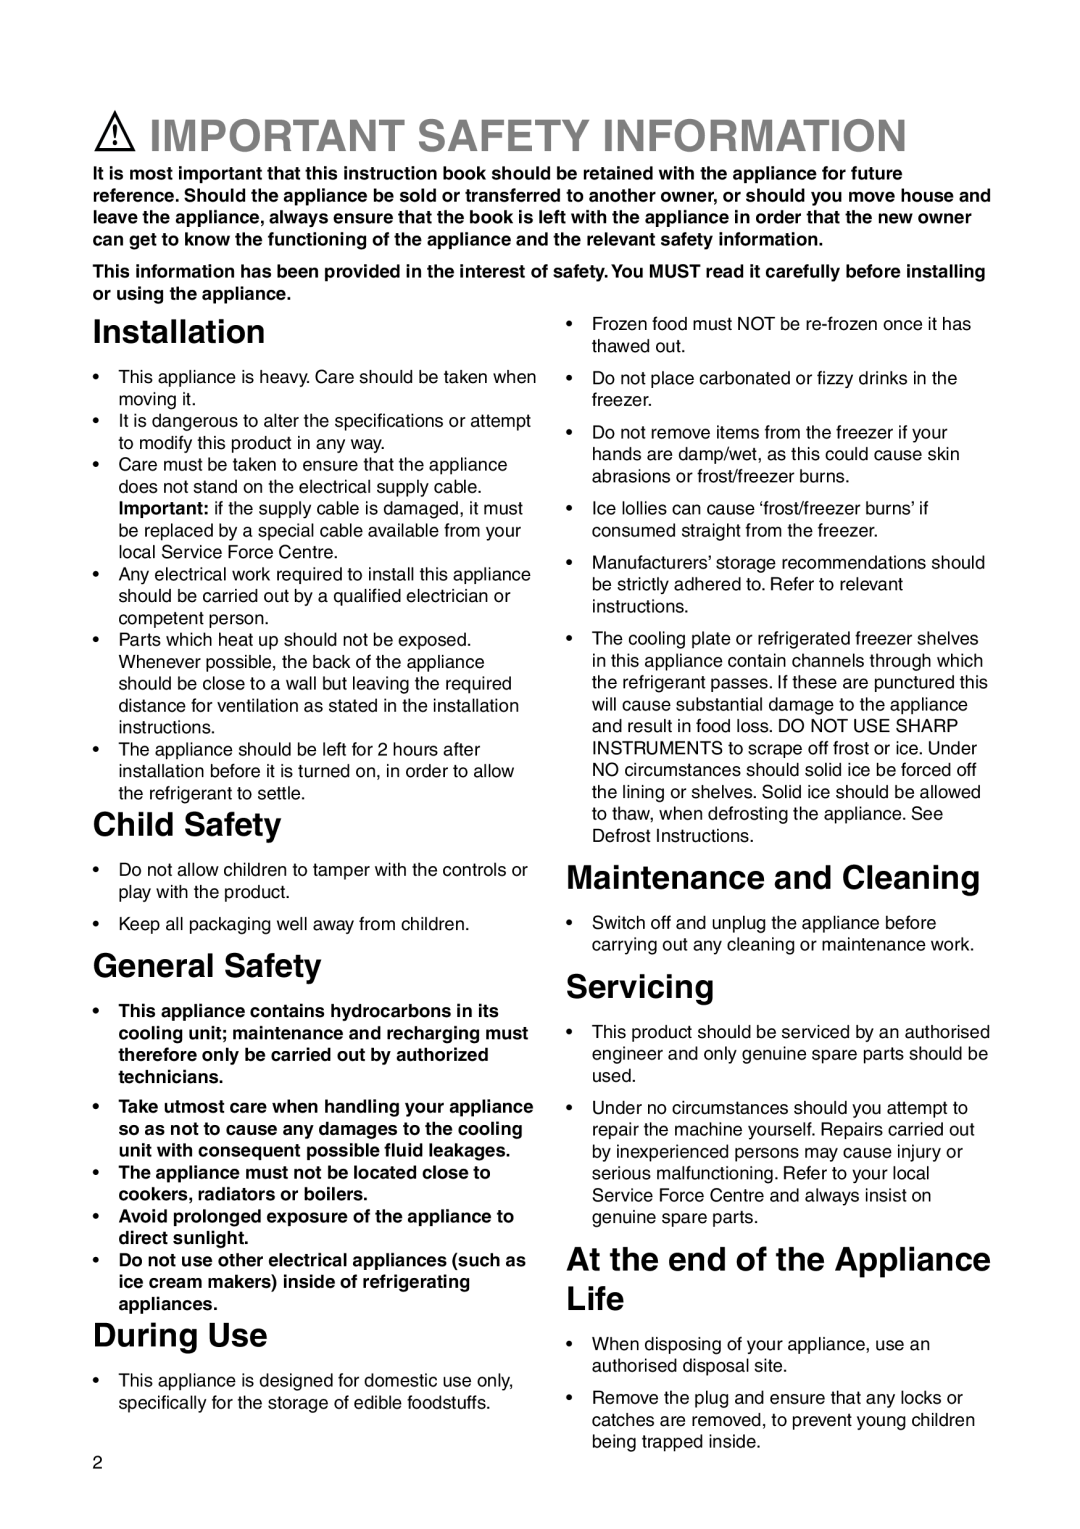 Zanussi ZI 920/9 KA manual Important Safety Information, Installation, Child Safety, General Safety, During Use, Servicing 